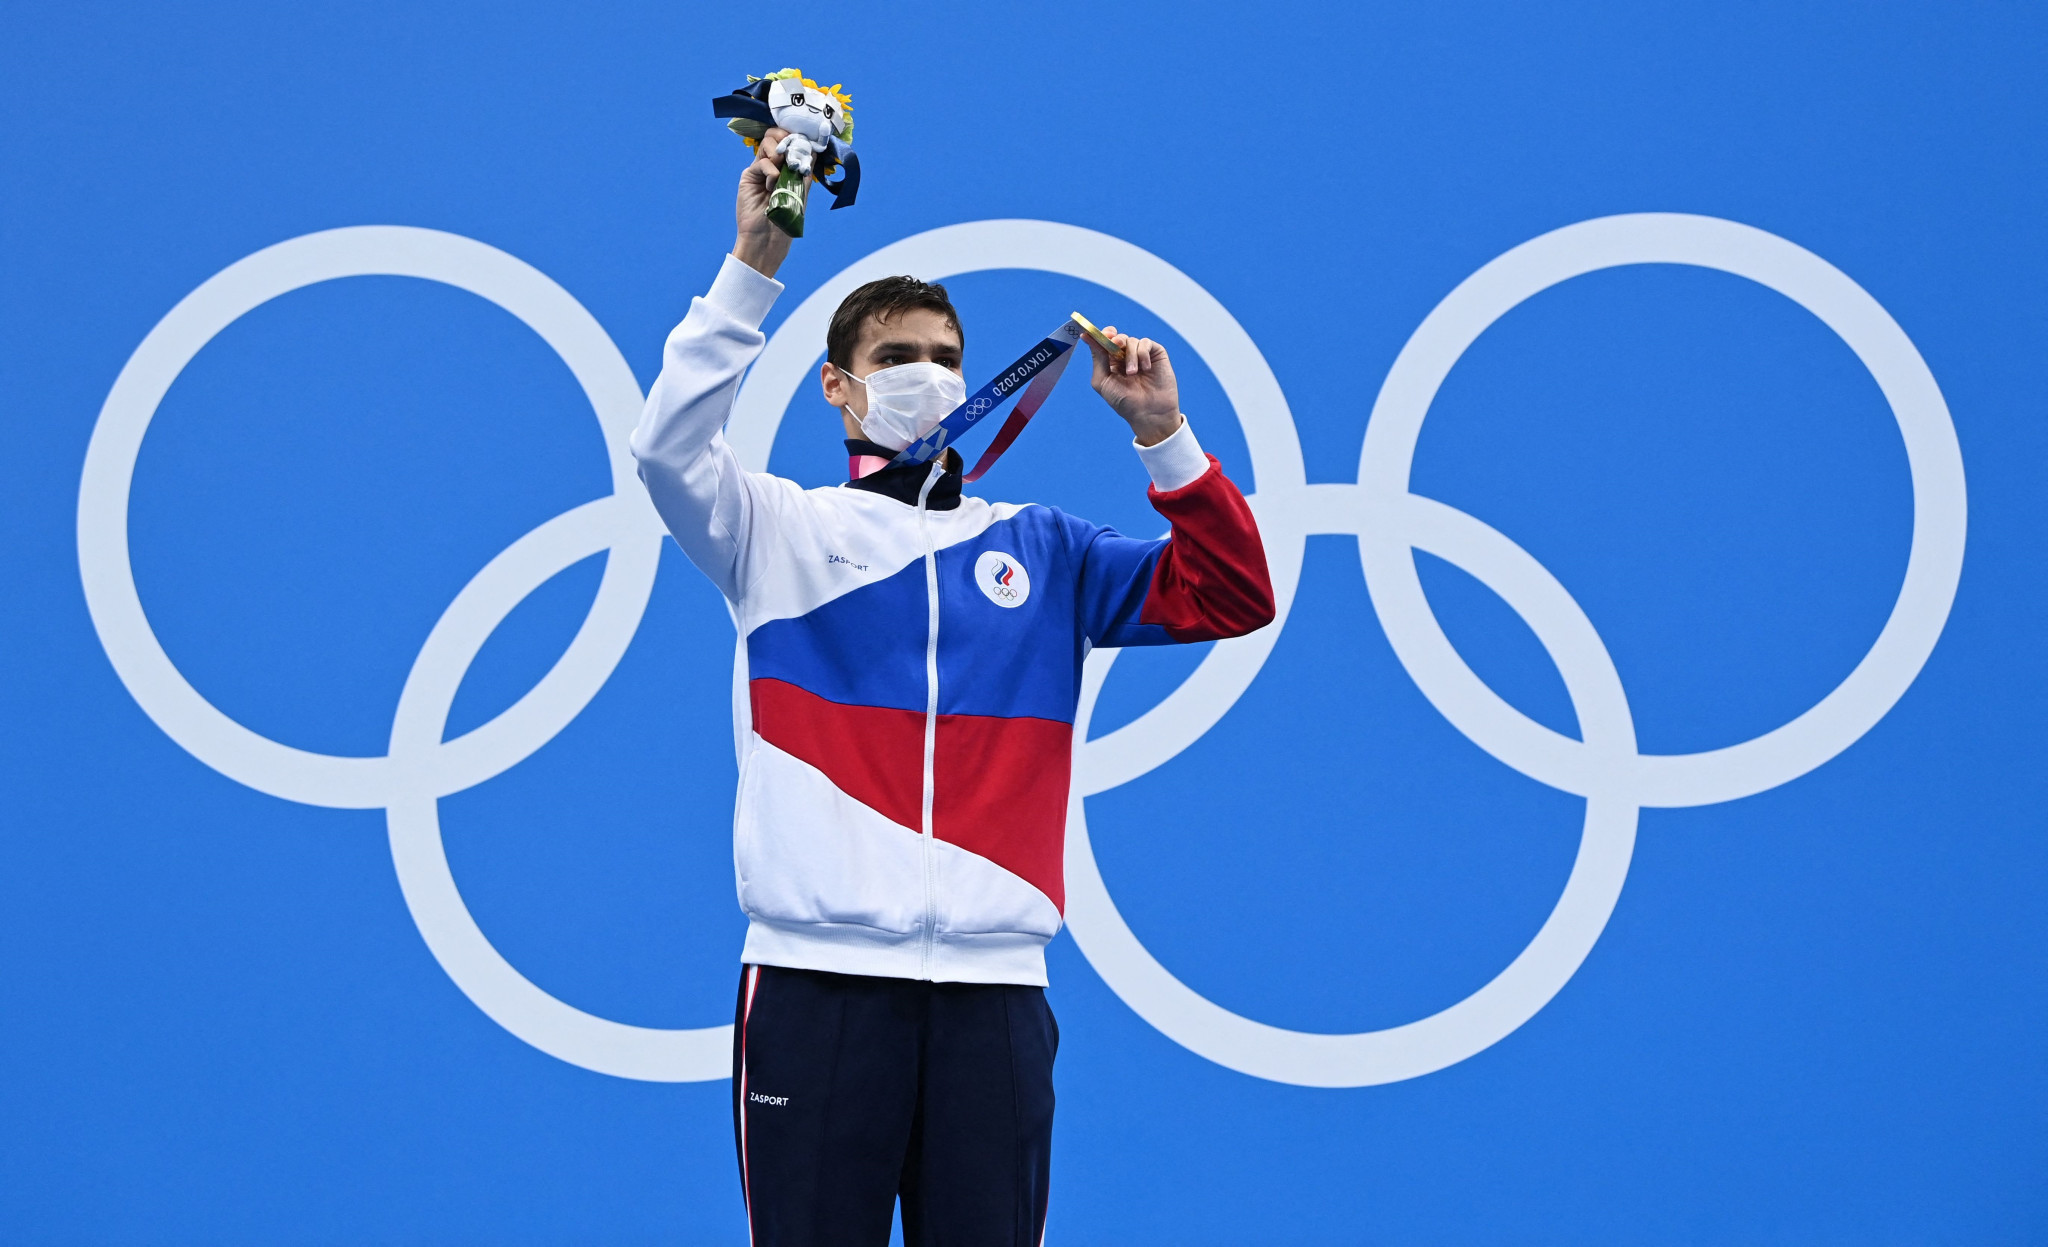 Evgeny Rylov claimed two gold medals at the Tokyo 2020 Olympics ©Getty Images